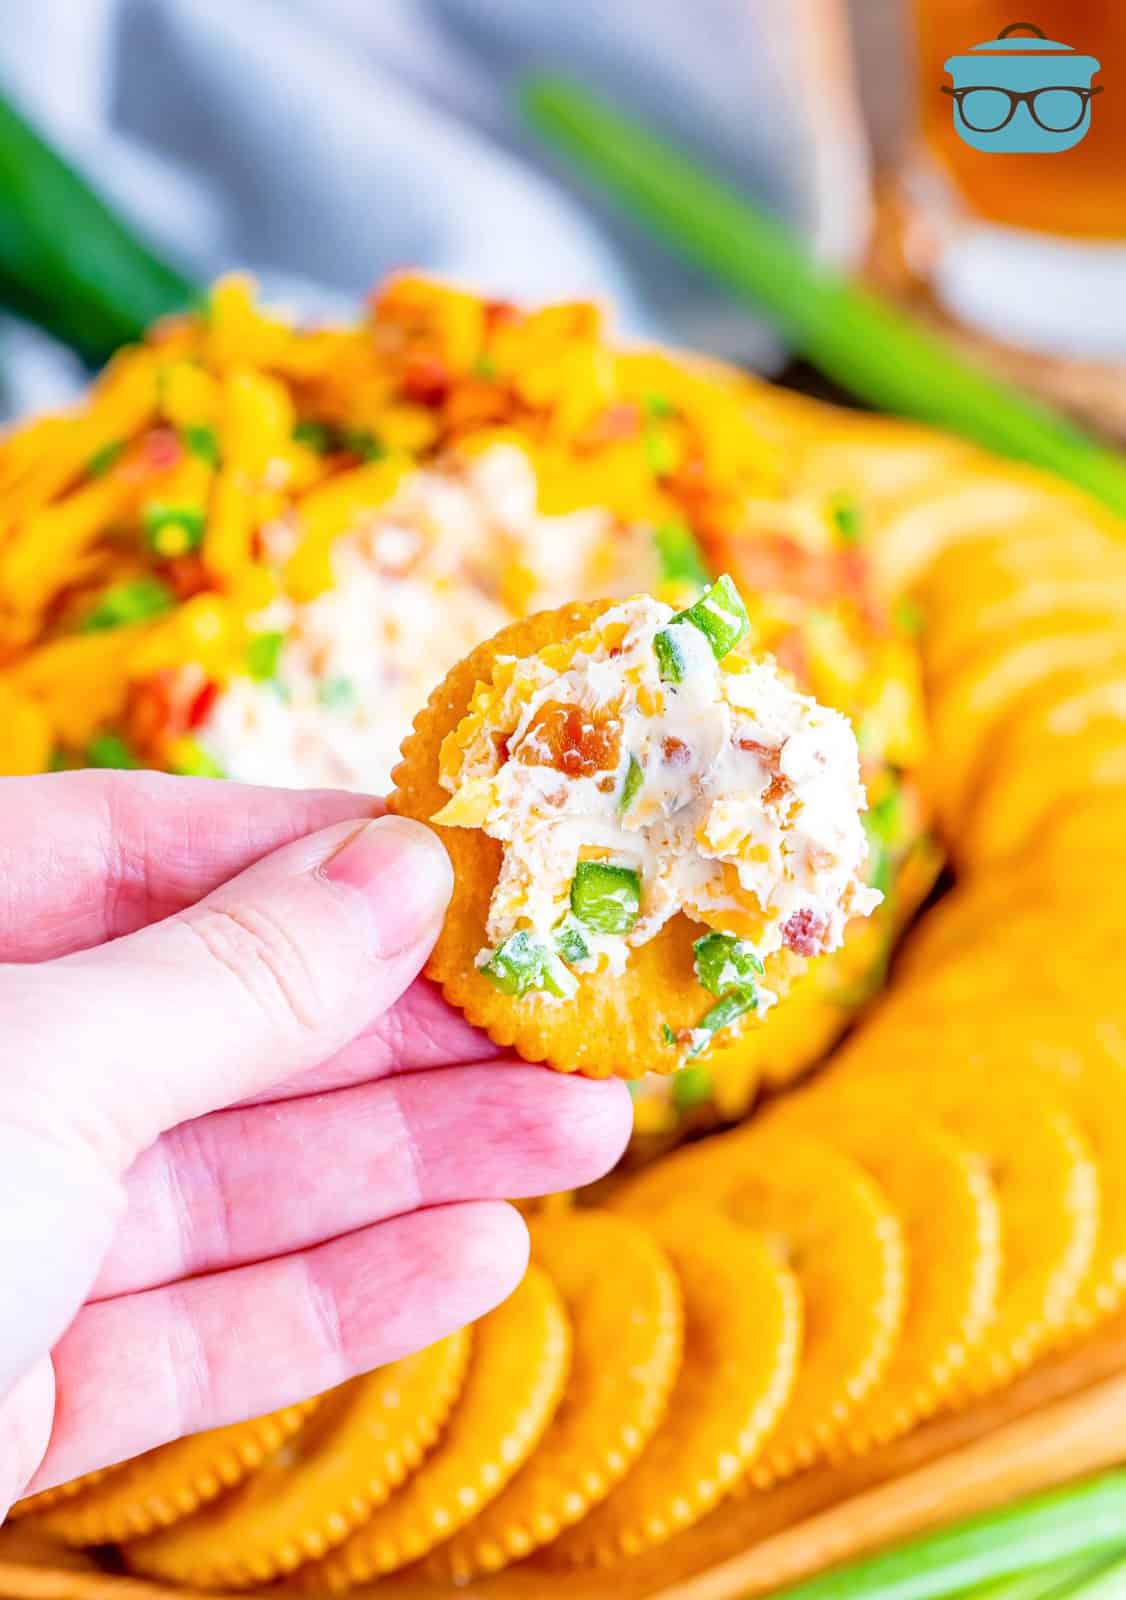 A hand holding a cracker with a serving of Jalapeno cheeseball on it.